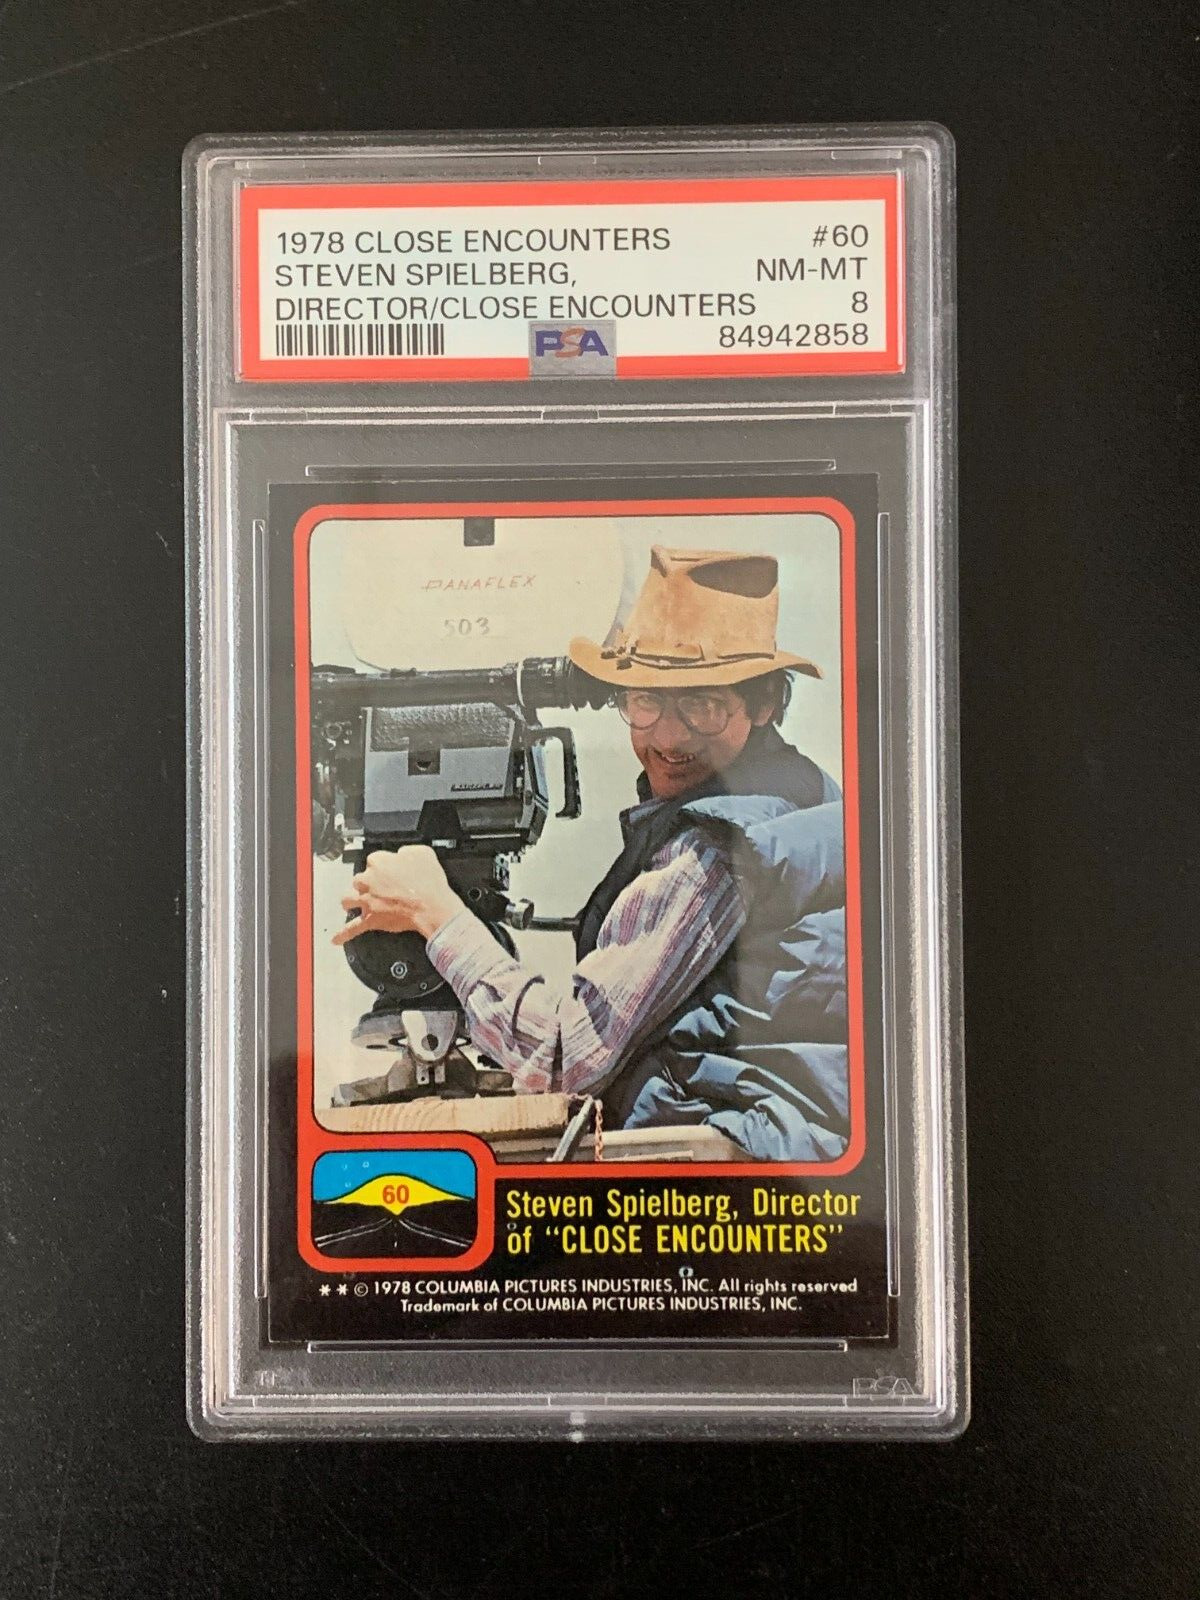 1978 Topps Close Encounters Steven Spielberg Director Rookie RC #60 PSA 8 NM MT